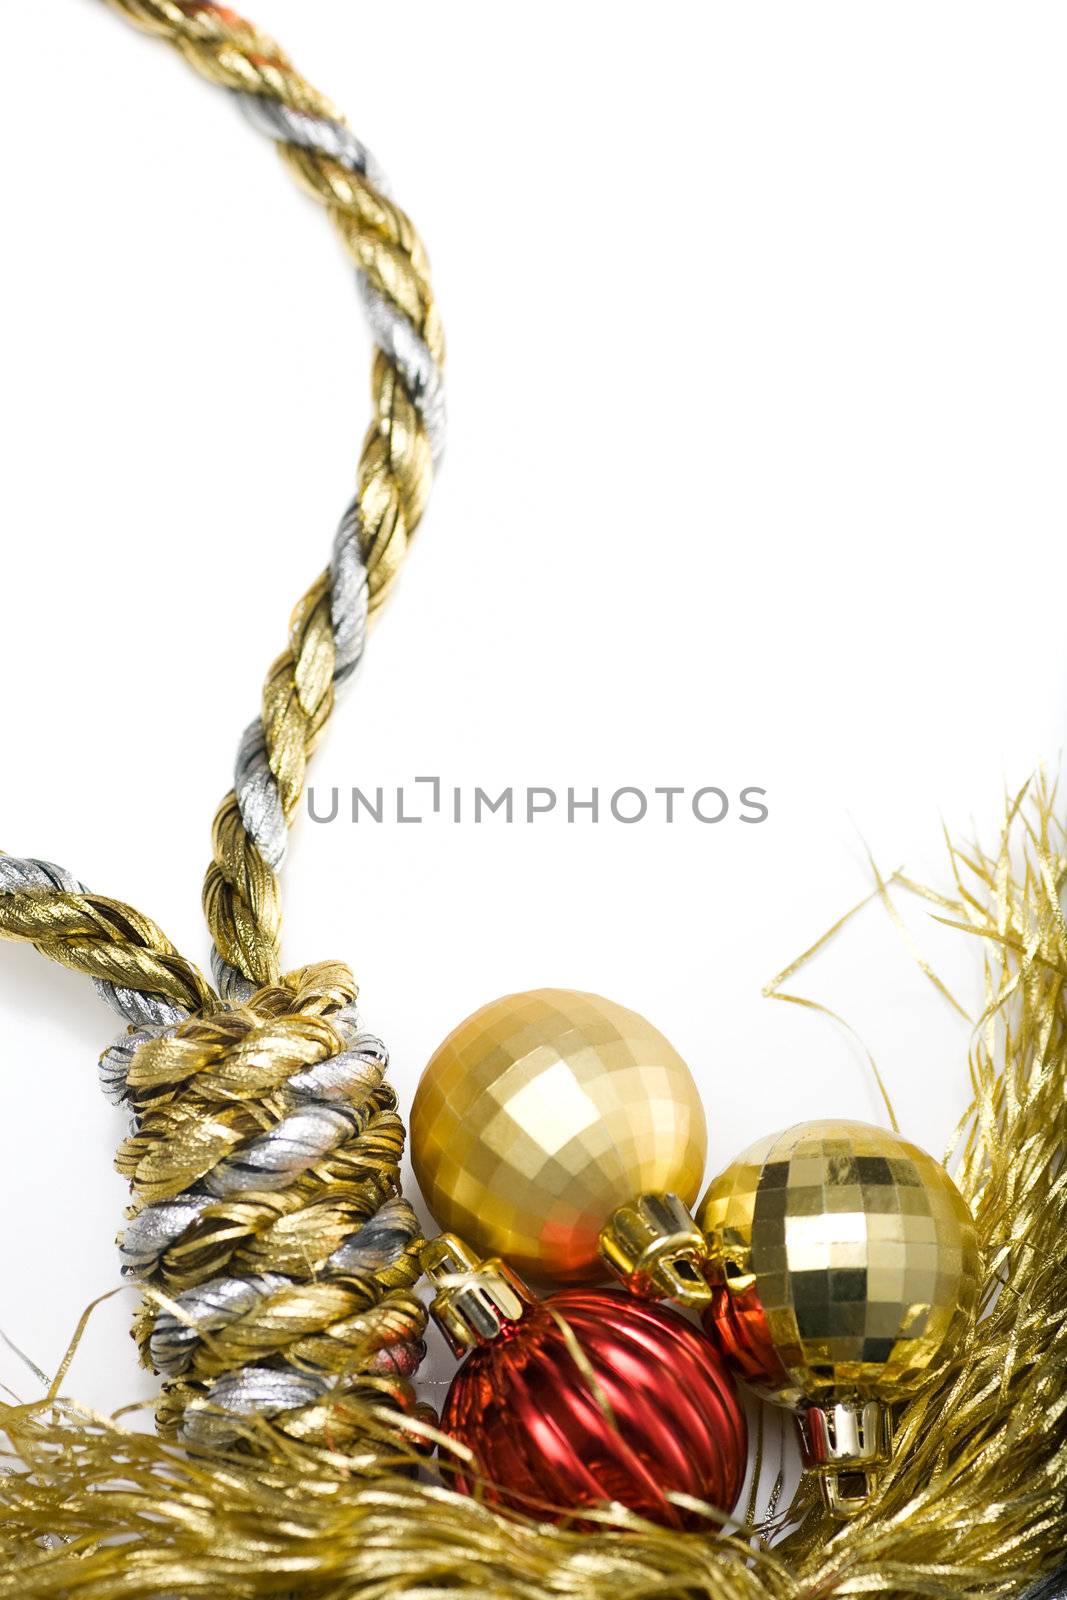 Noose made out of christmas rope, with baubles in the background, isolated on white.